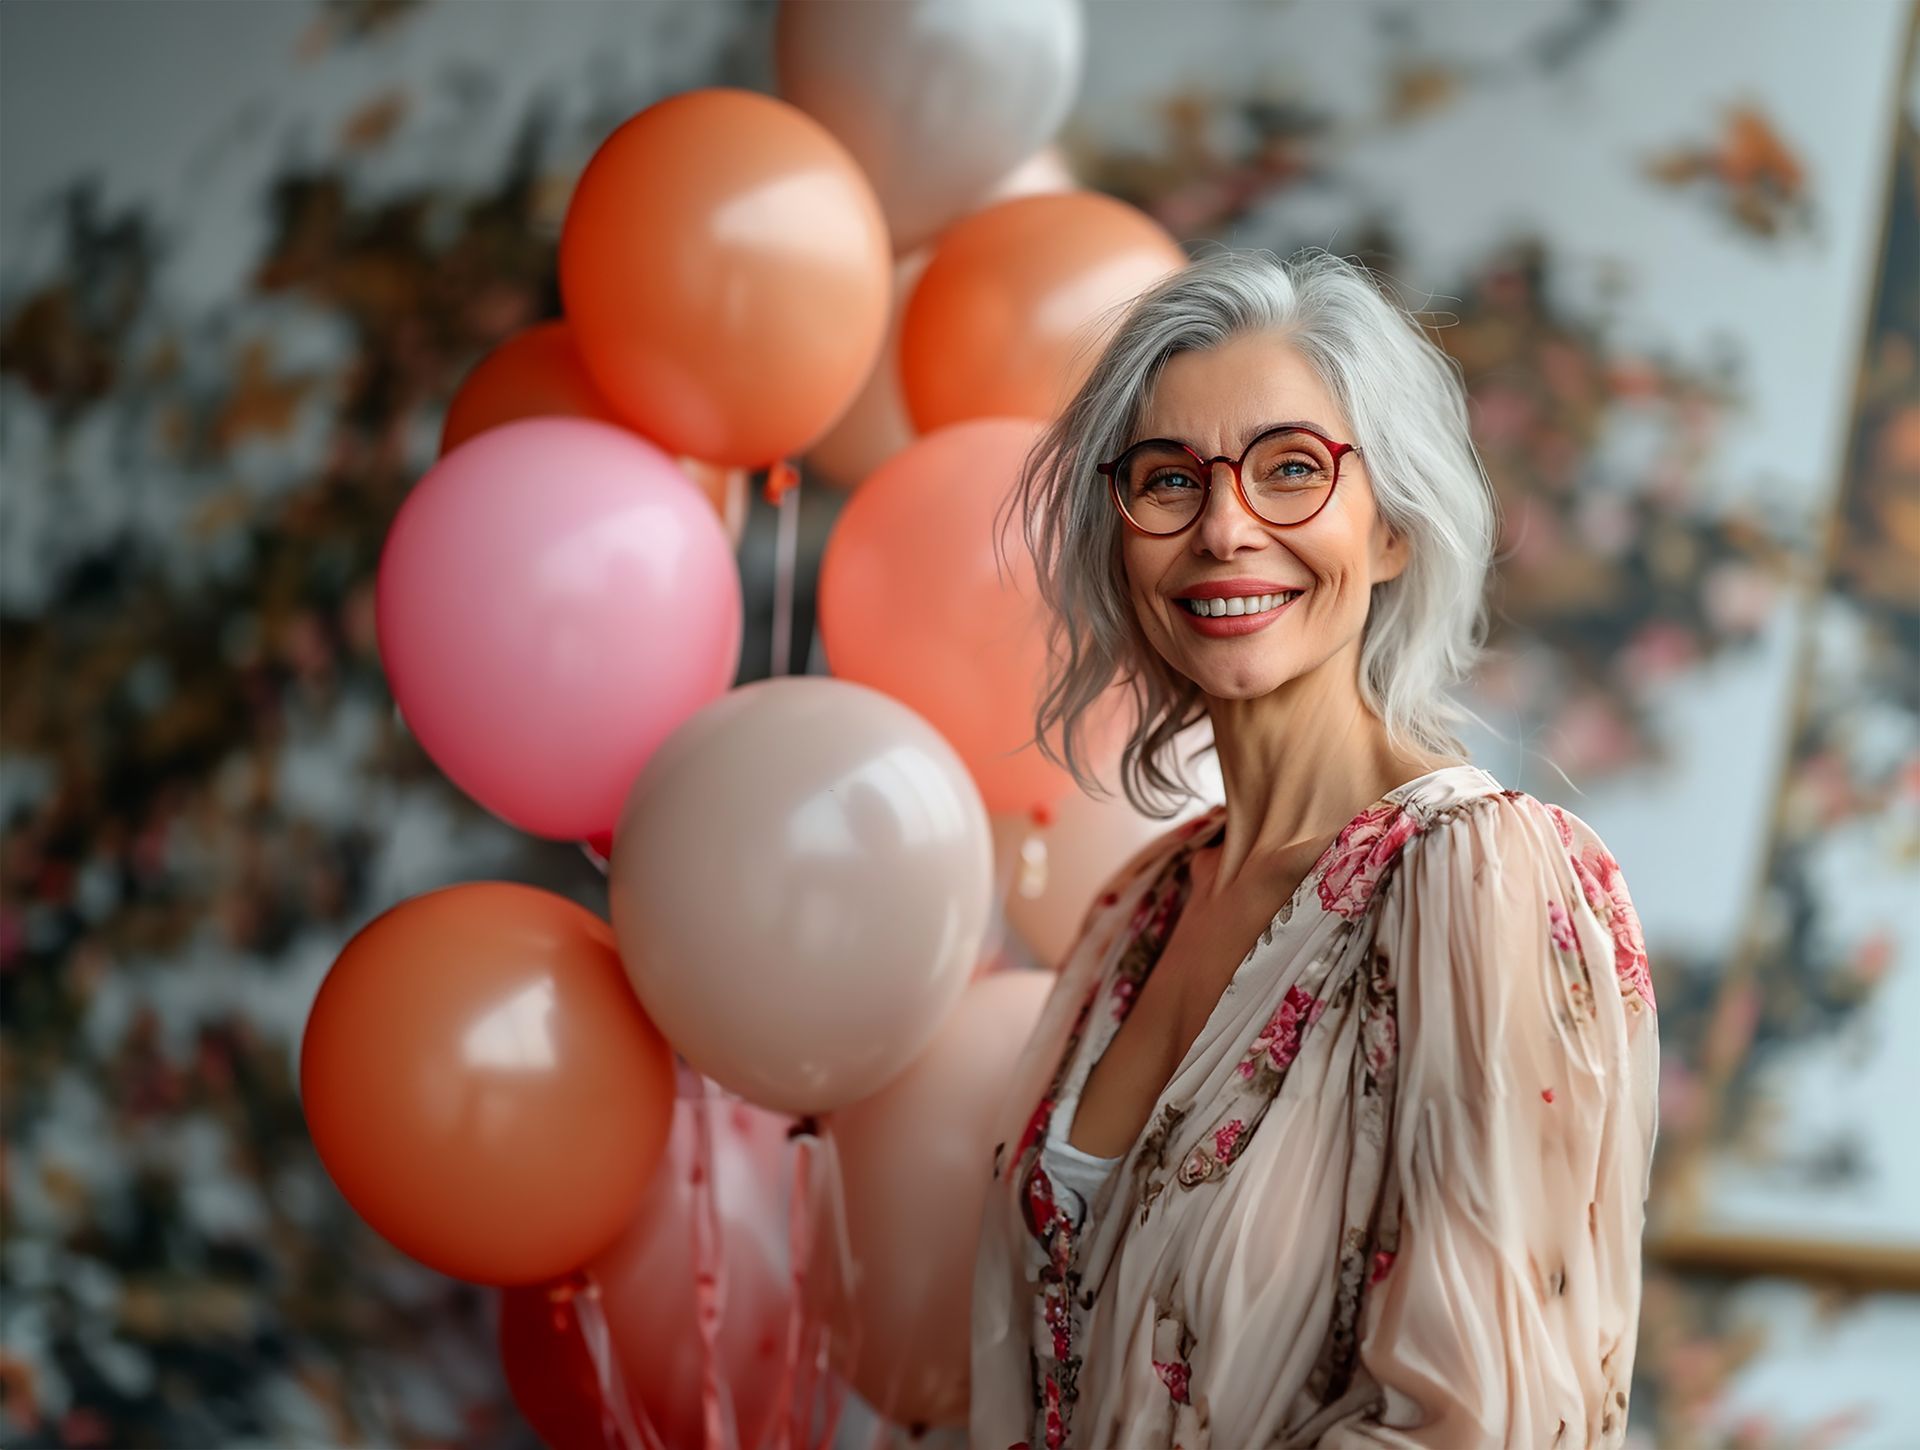 Gray haired lady with glasses smiling as she stands in front of pink, orange, white balloon bouquet.